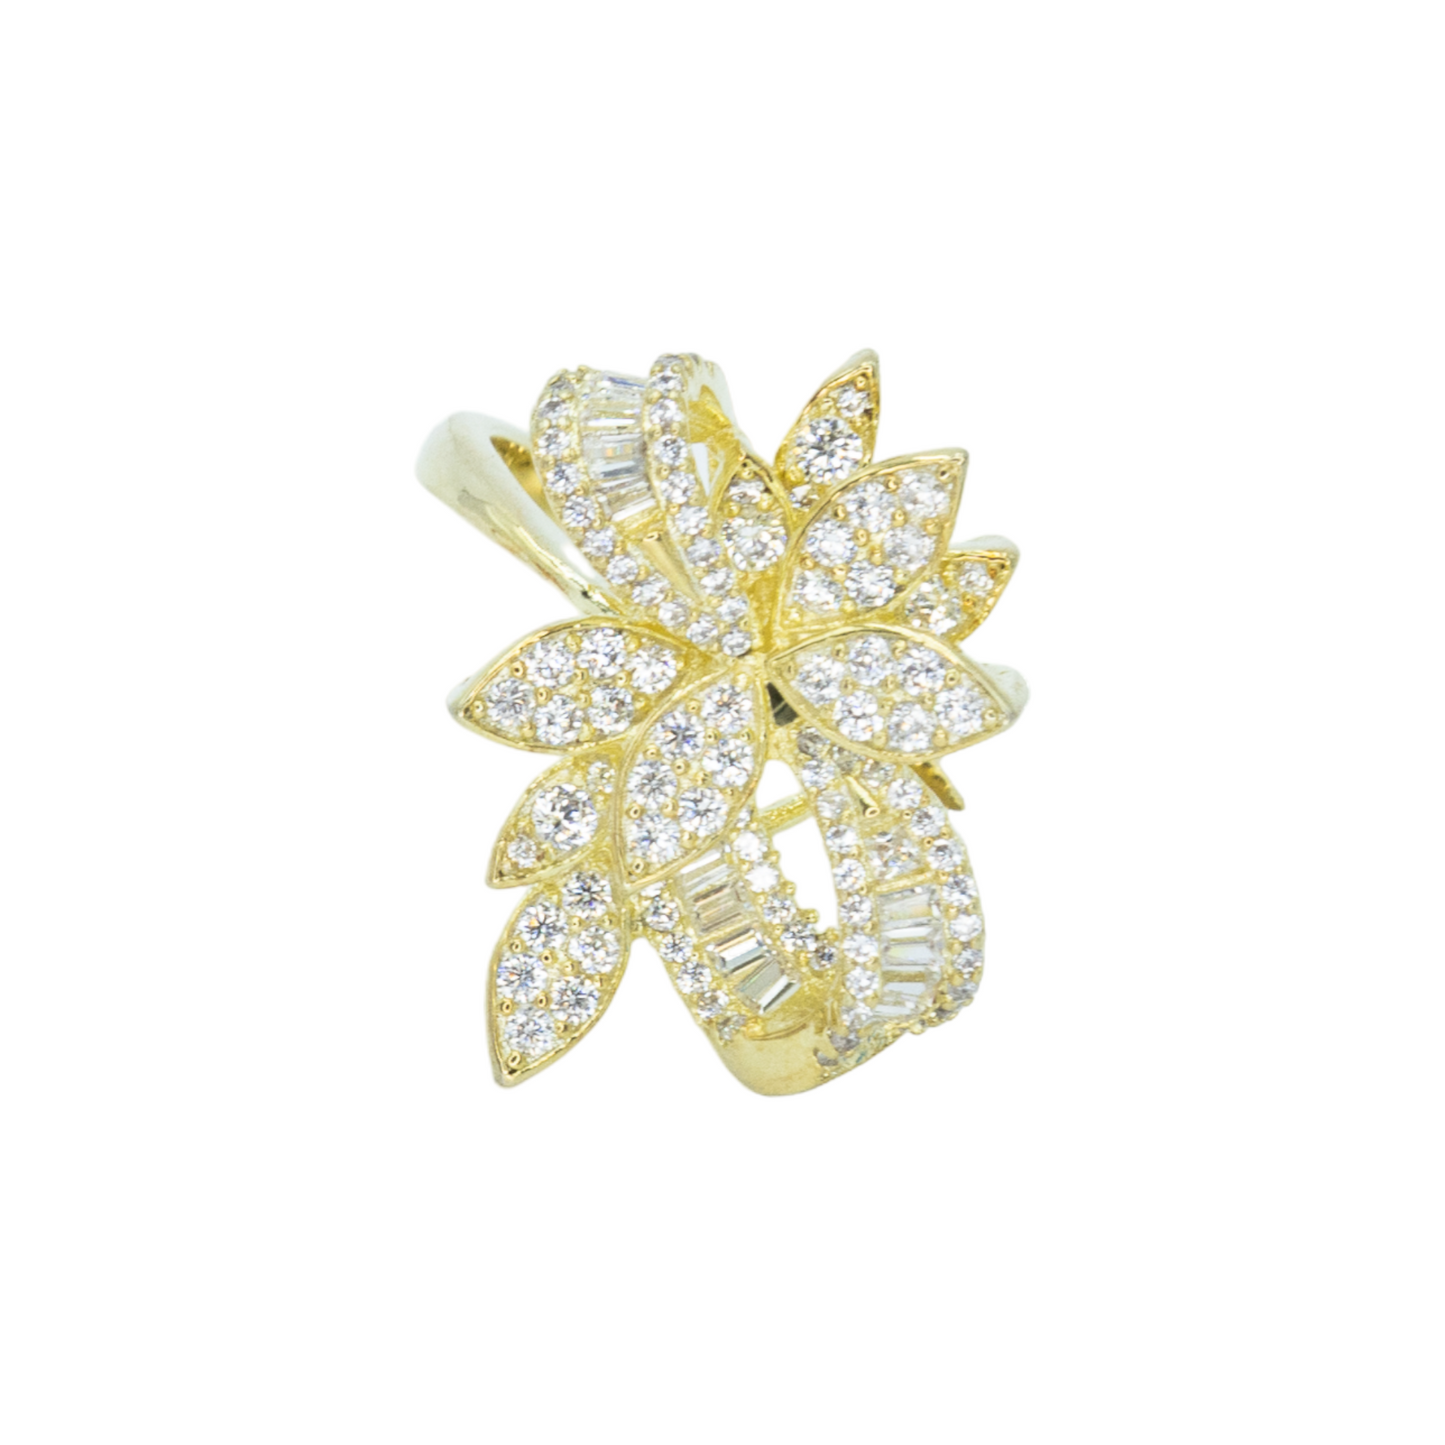 Flower encrusted ring with pave and baguette 3A CZ stones rhodium G plated